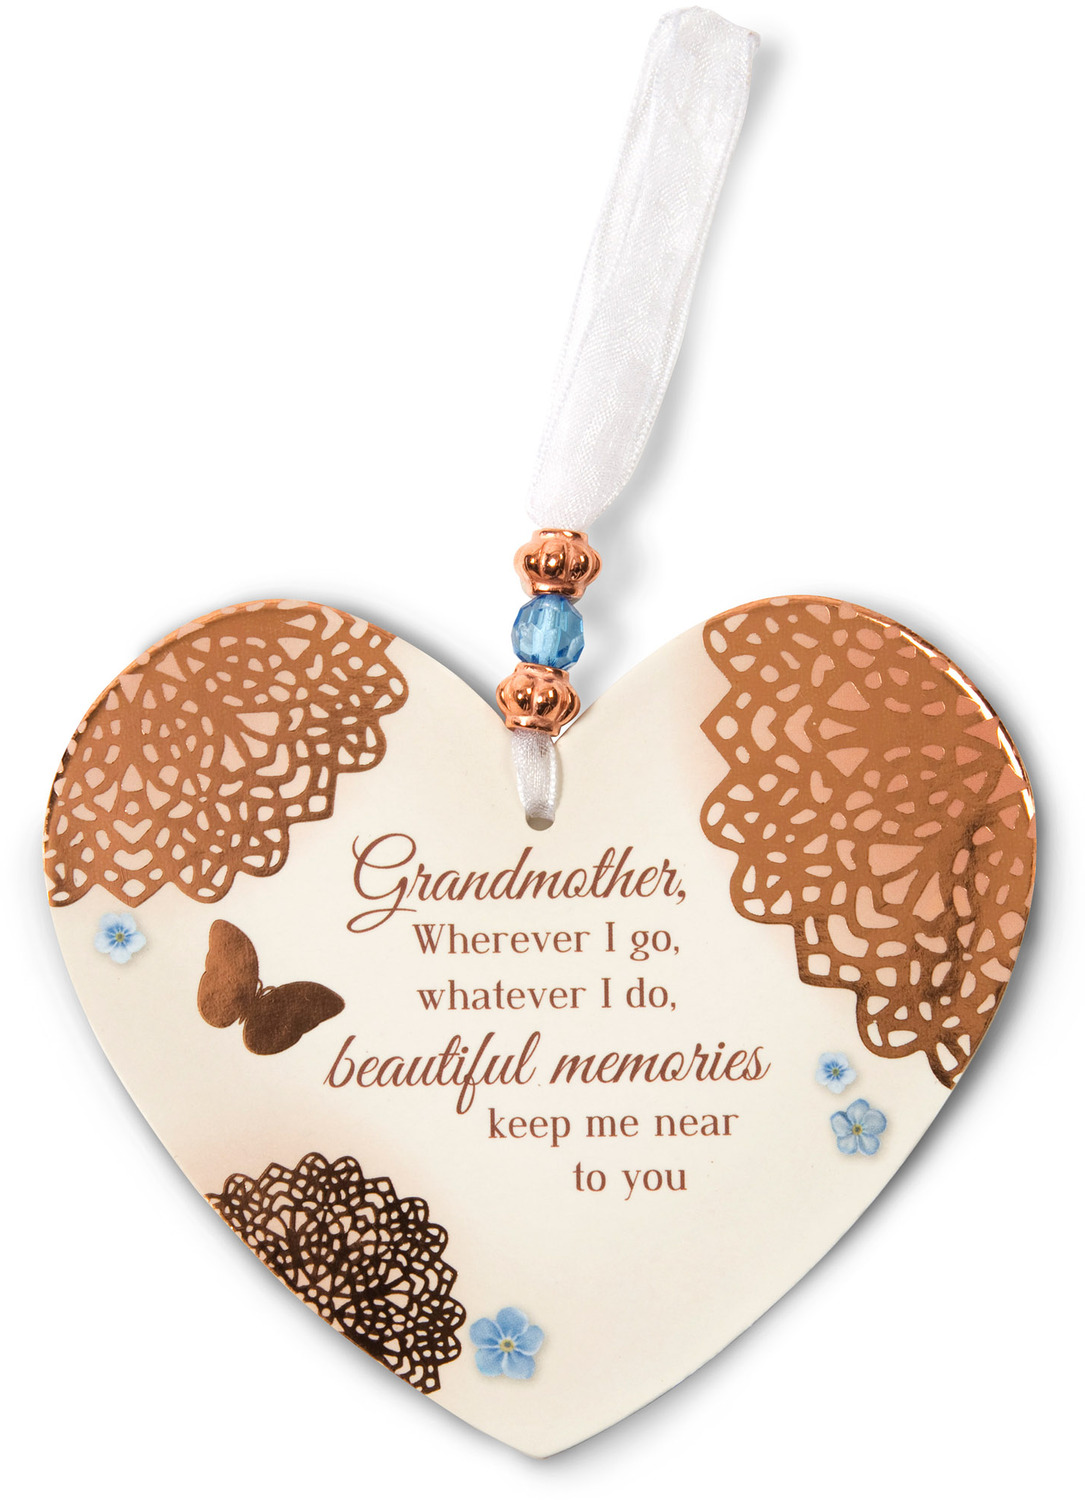 Memories of Grandmother by Light Your Way Memorial - Memories of Grandmother - 3.5" x 4" Heart-Shaped Ornament